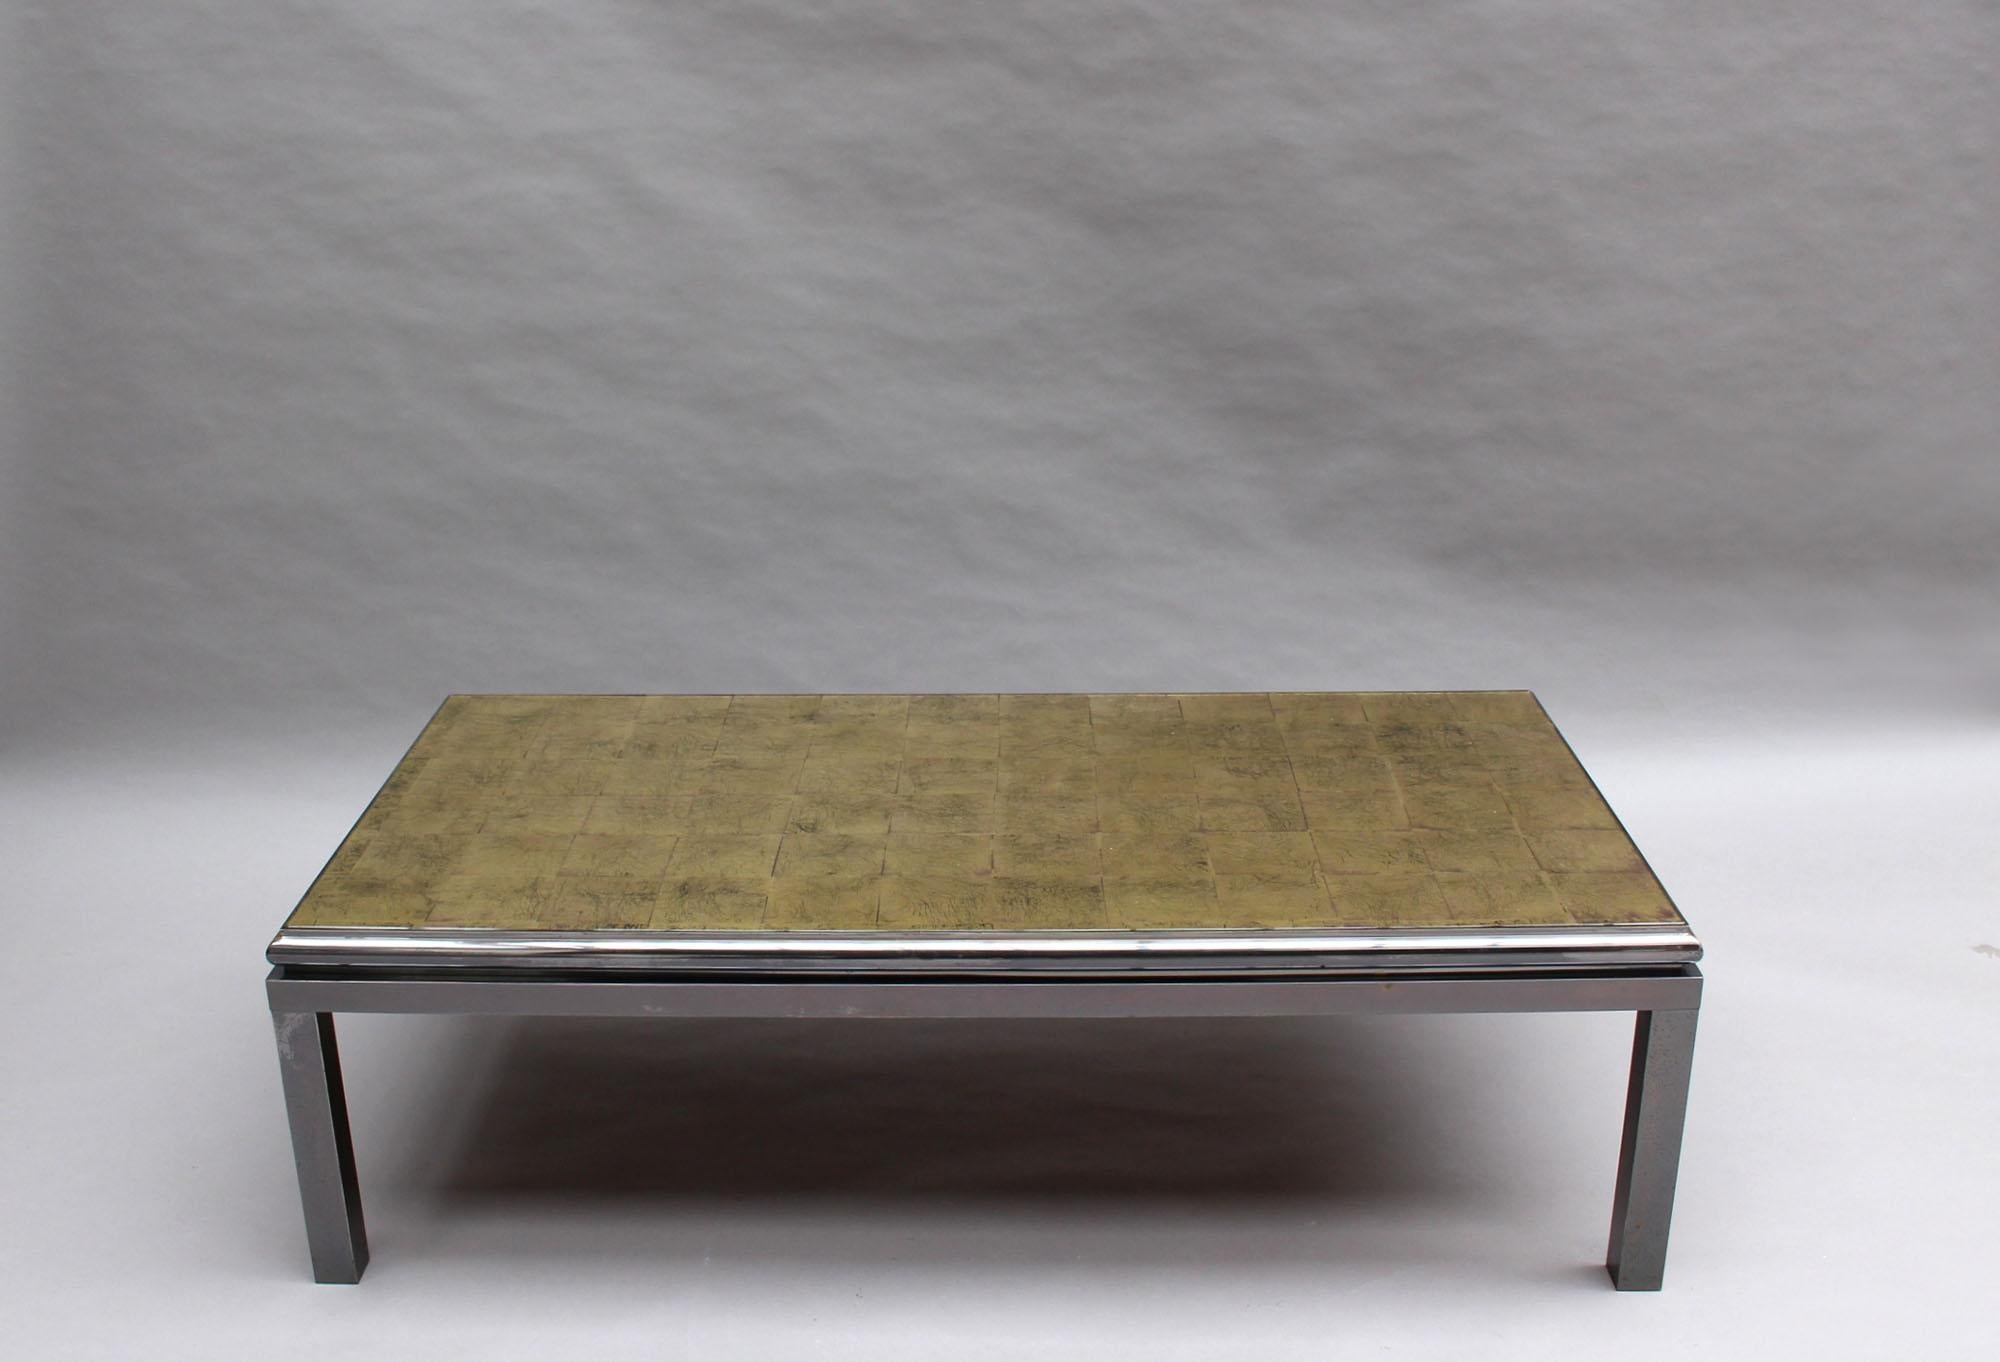 A fine French mid-century coffee table with a blackened patinated chrome metal frame and an églomisé glass top.
Commonly attributed to Guy Lefevre for Maison Jansen.